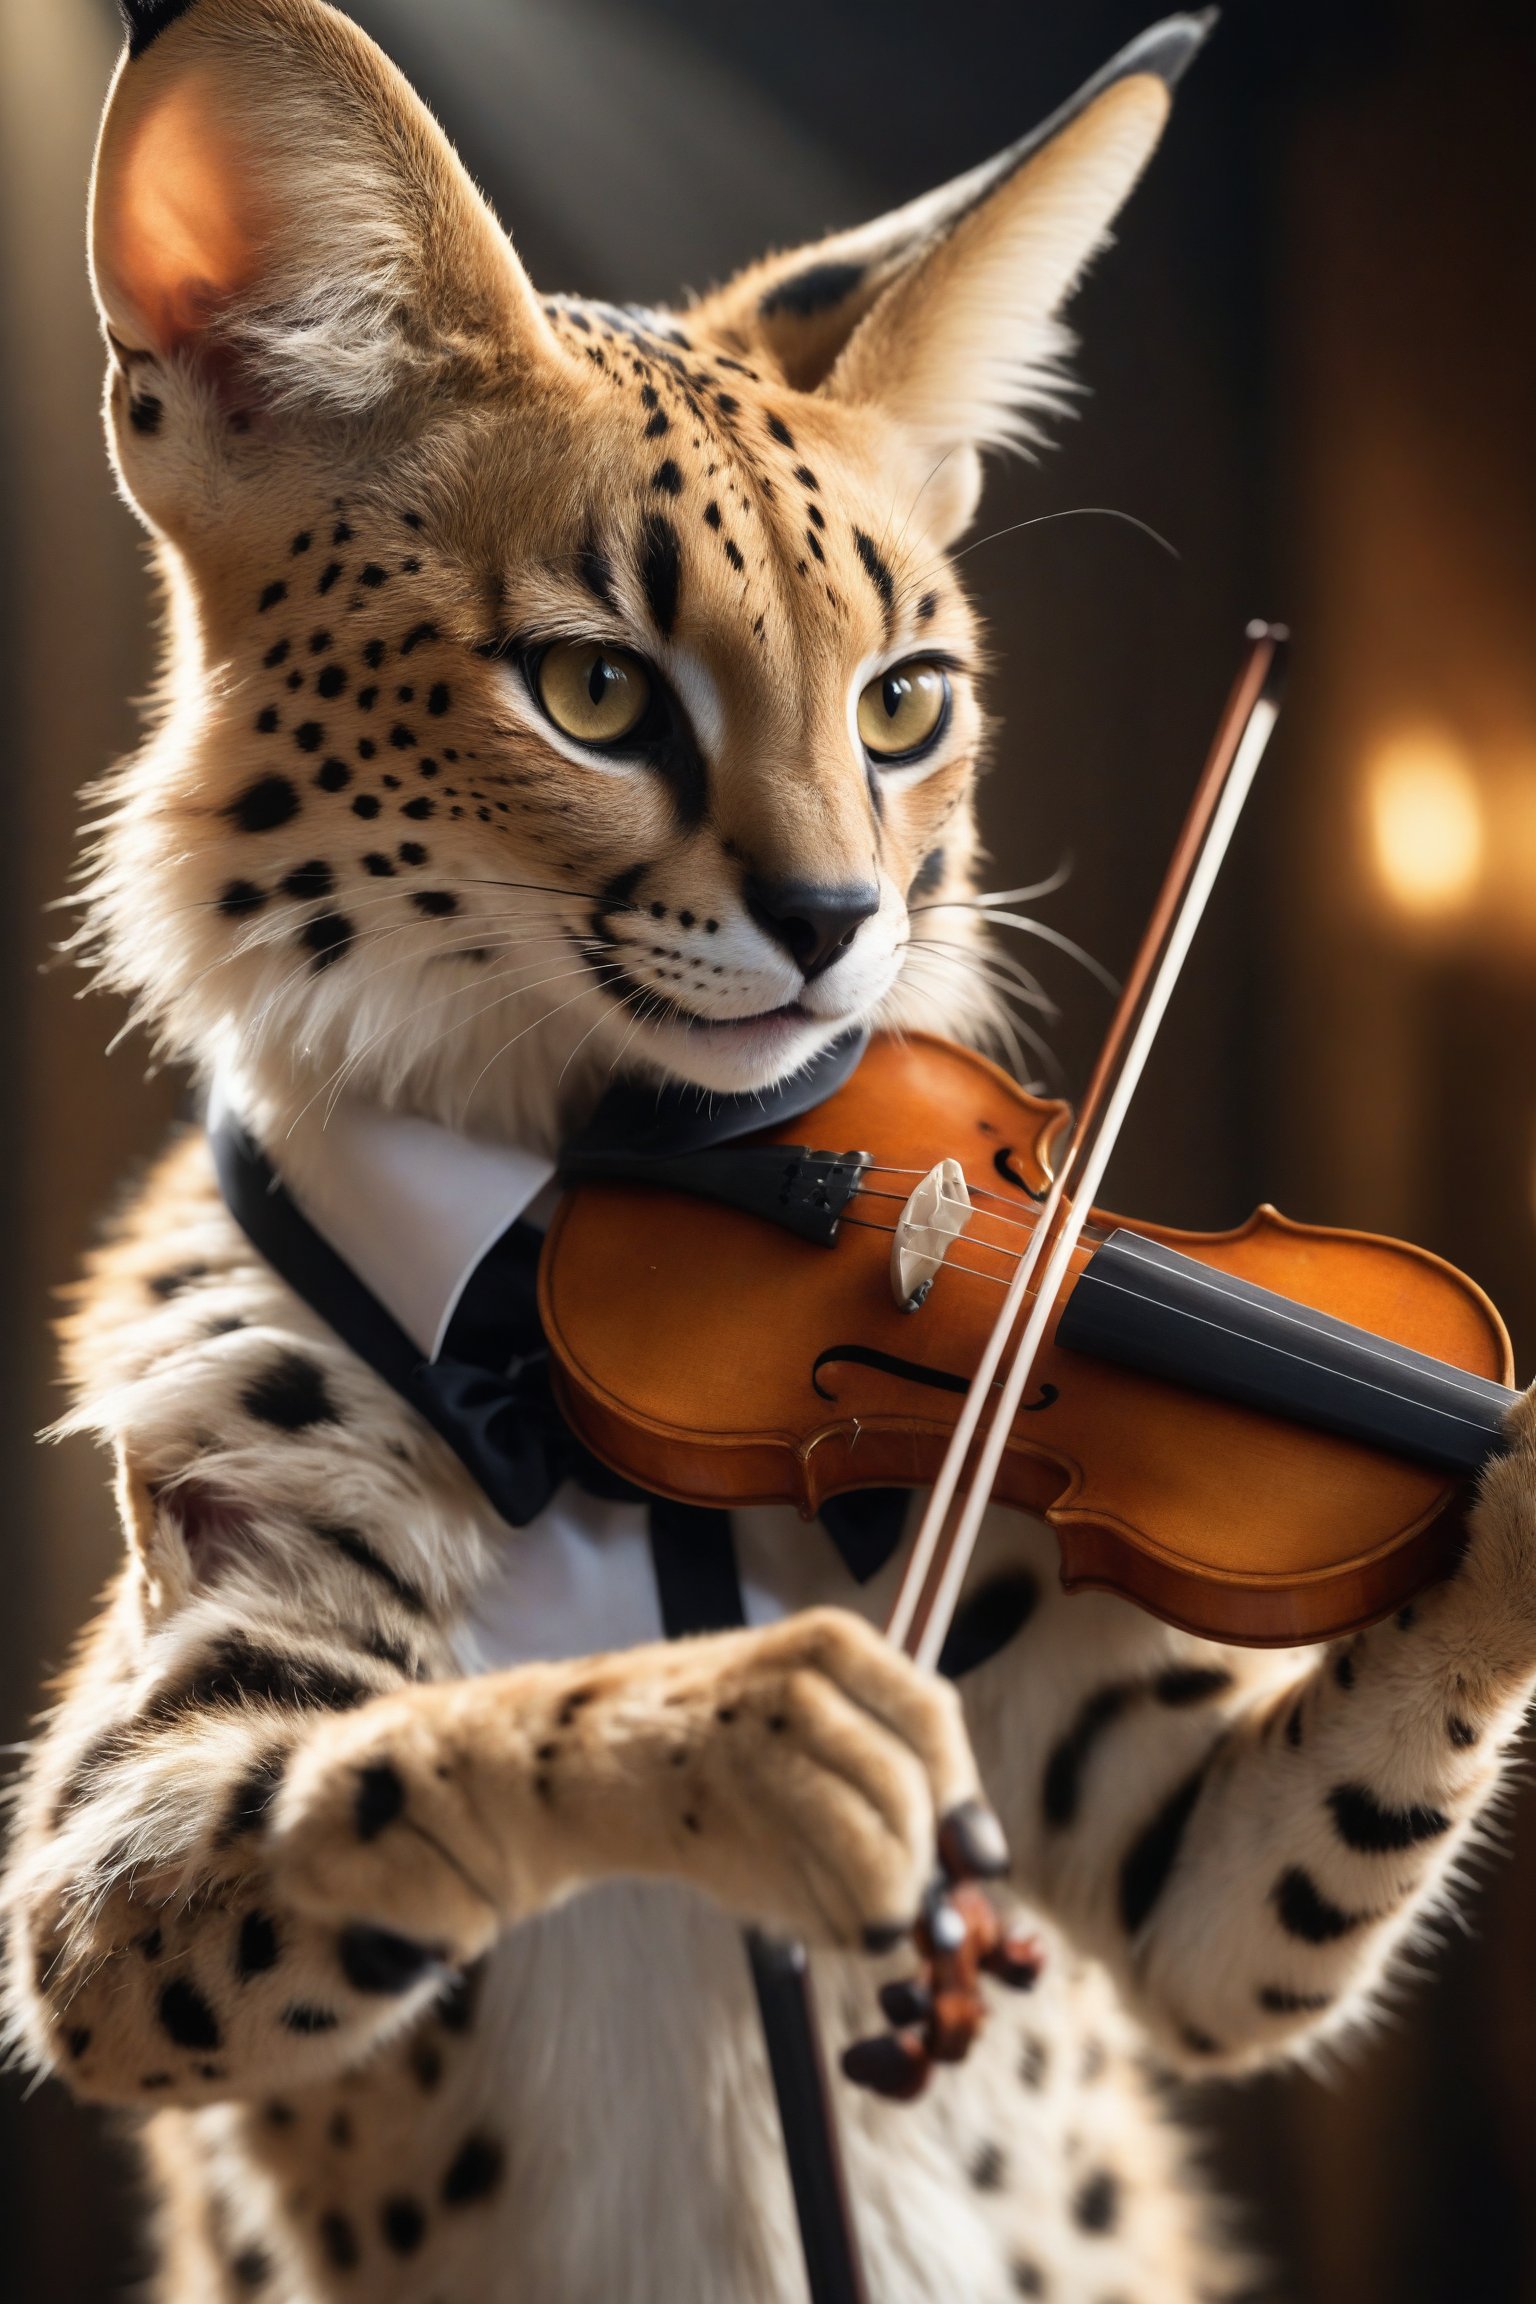 Serval cat virtuoso playing violin, focused expression, standing upright, paws on strings, bow in tail, concert hall background, dramatic lighting, photorealistic fur texture, 8K resolution